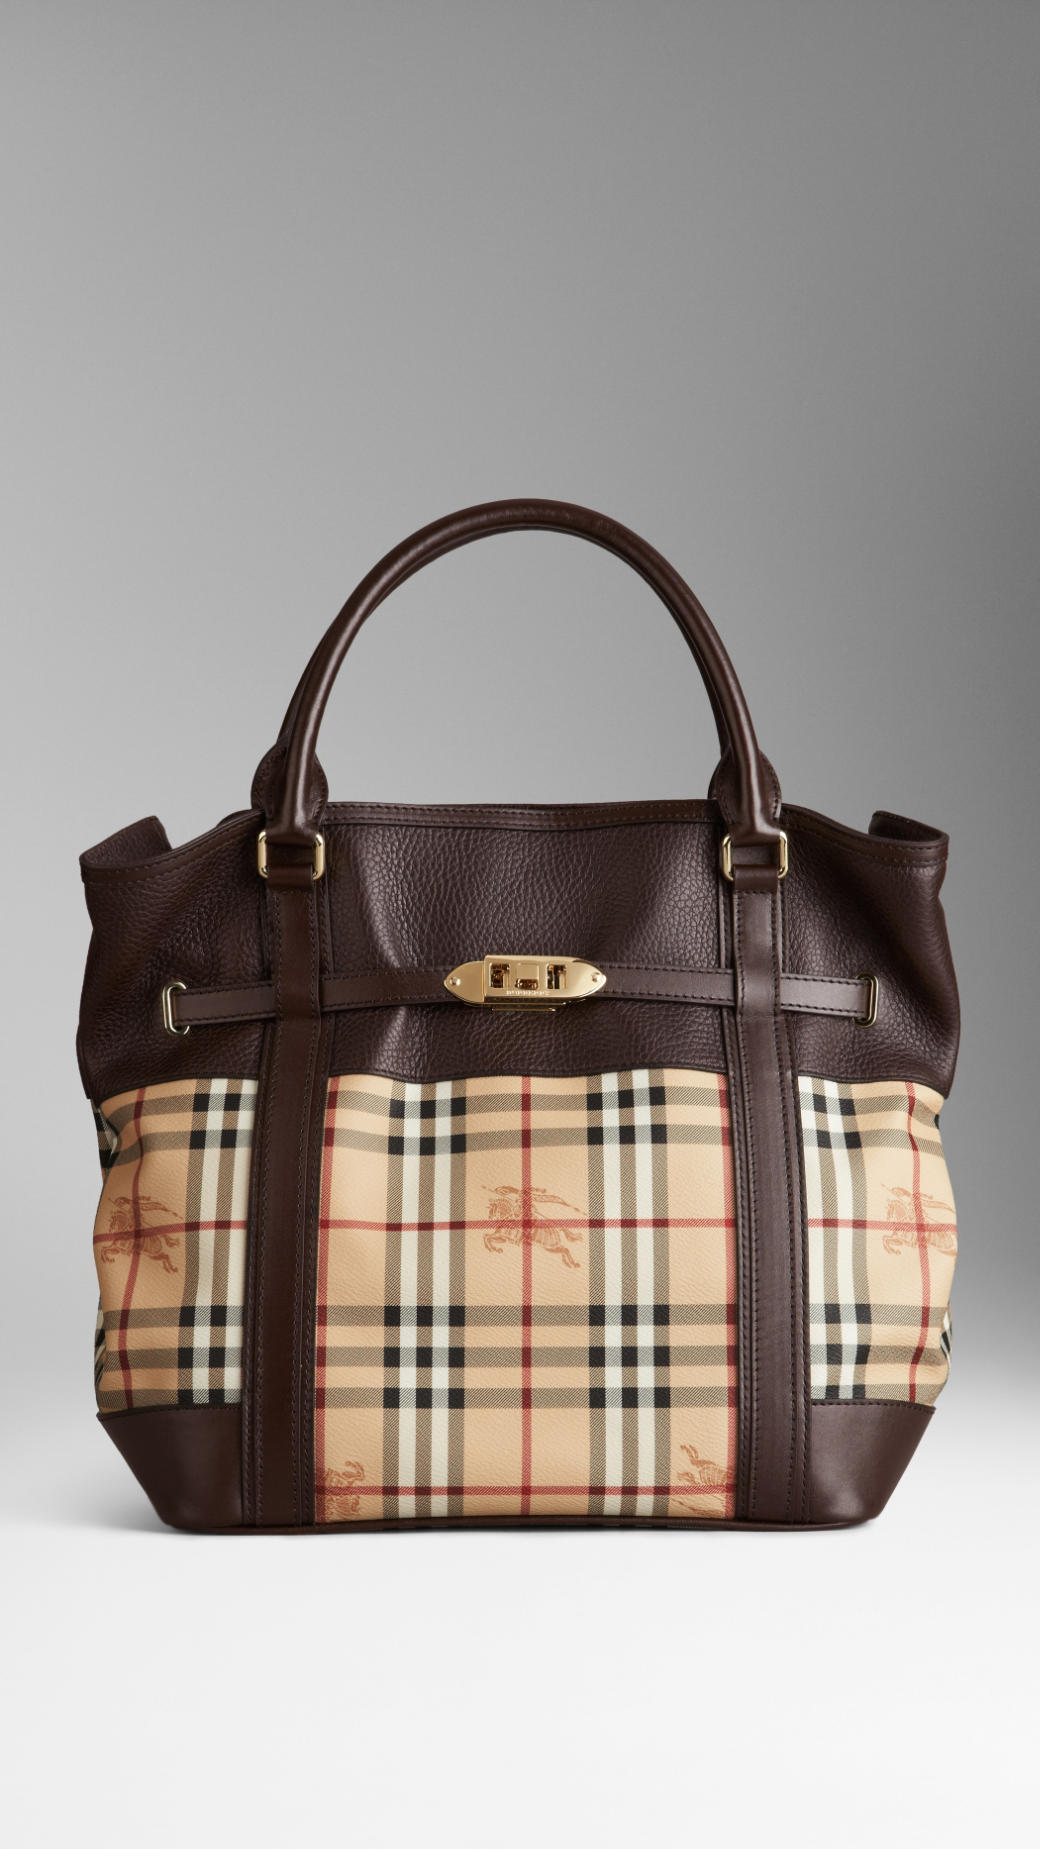 Burberry Medium Leather Haymarket Check Tote Bag in Brown - Lyst